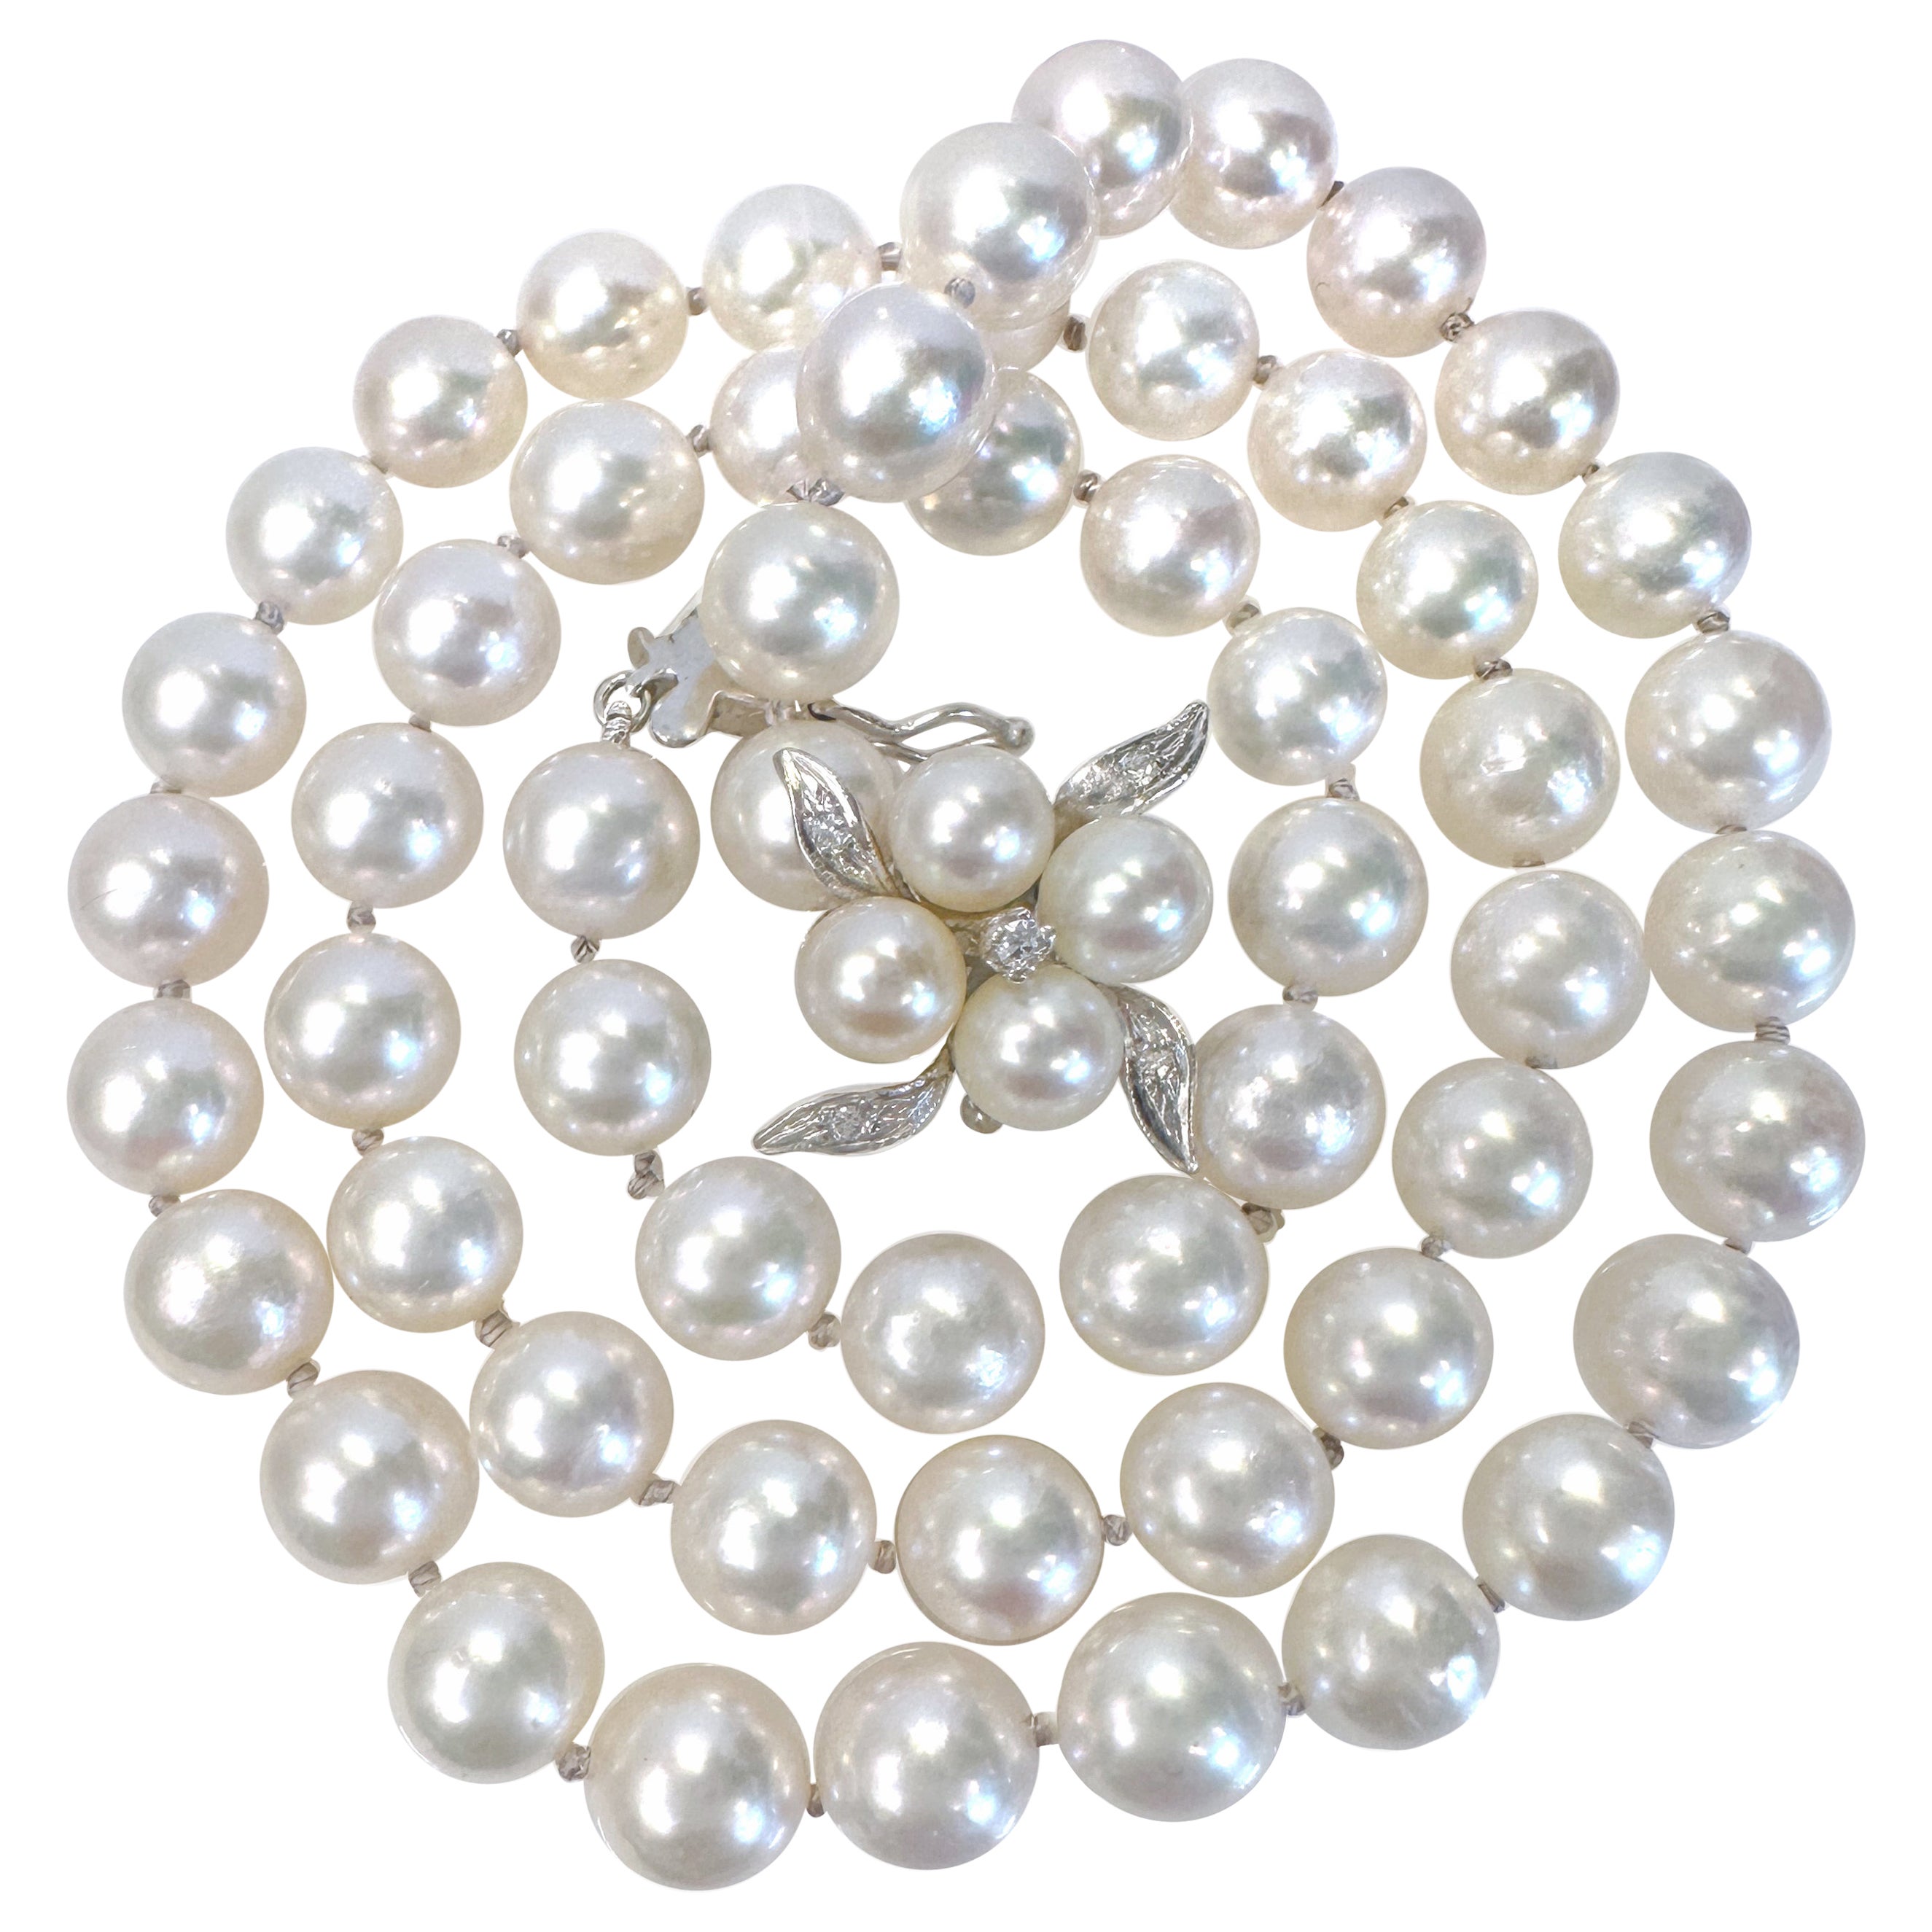 Princess Length 7mm Akoya Pearl Necklace with Vintage White Gold & Diamond Clasp For Sale